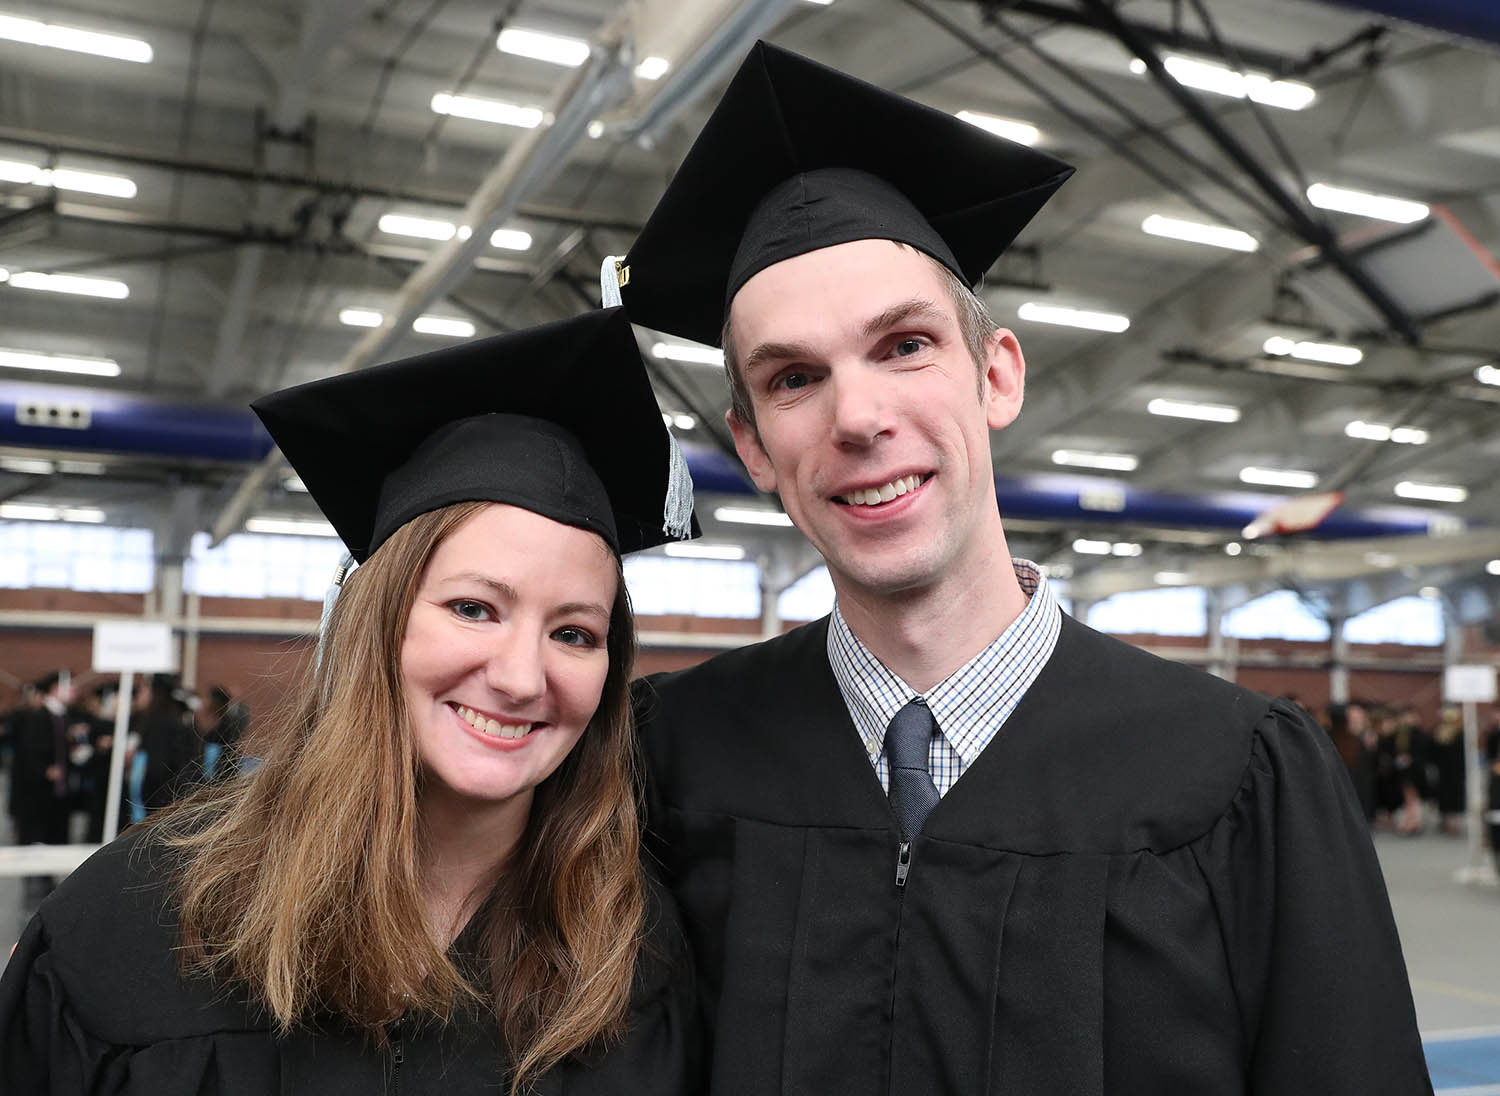 Sara and Brett Kluever received their Master of Education degrees in instructional technology Friday during UNK’s winter commencement. The Kluevers, who met at UNK before marrying in 2010, both teach fifth and sixth grades at Gibbon Public Schools. (Photos by Corbey R. Dorsey, UNK Communications)